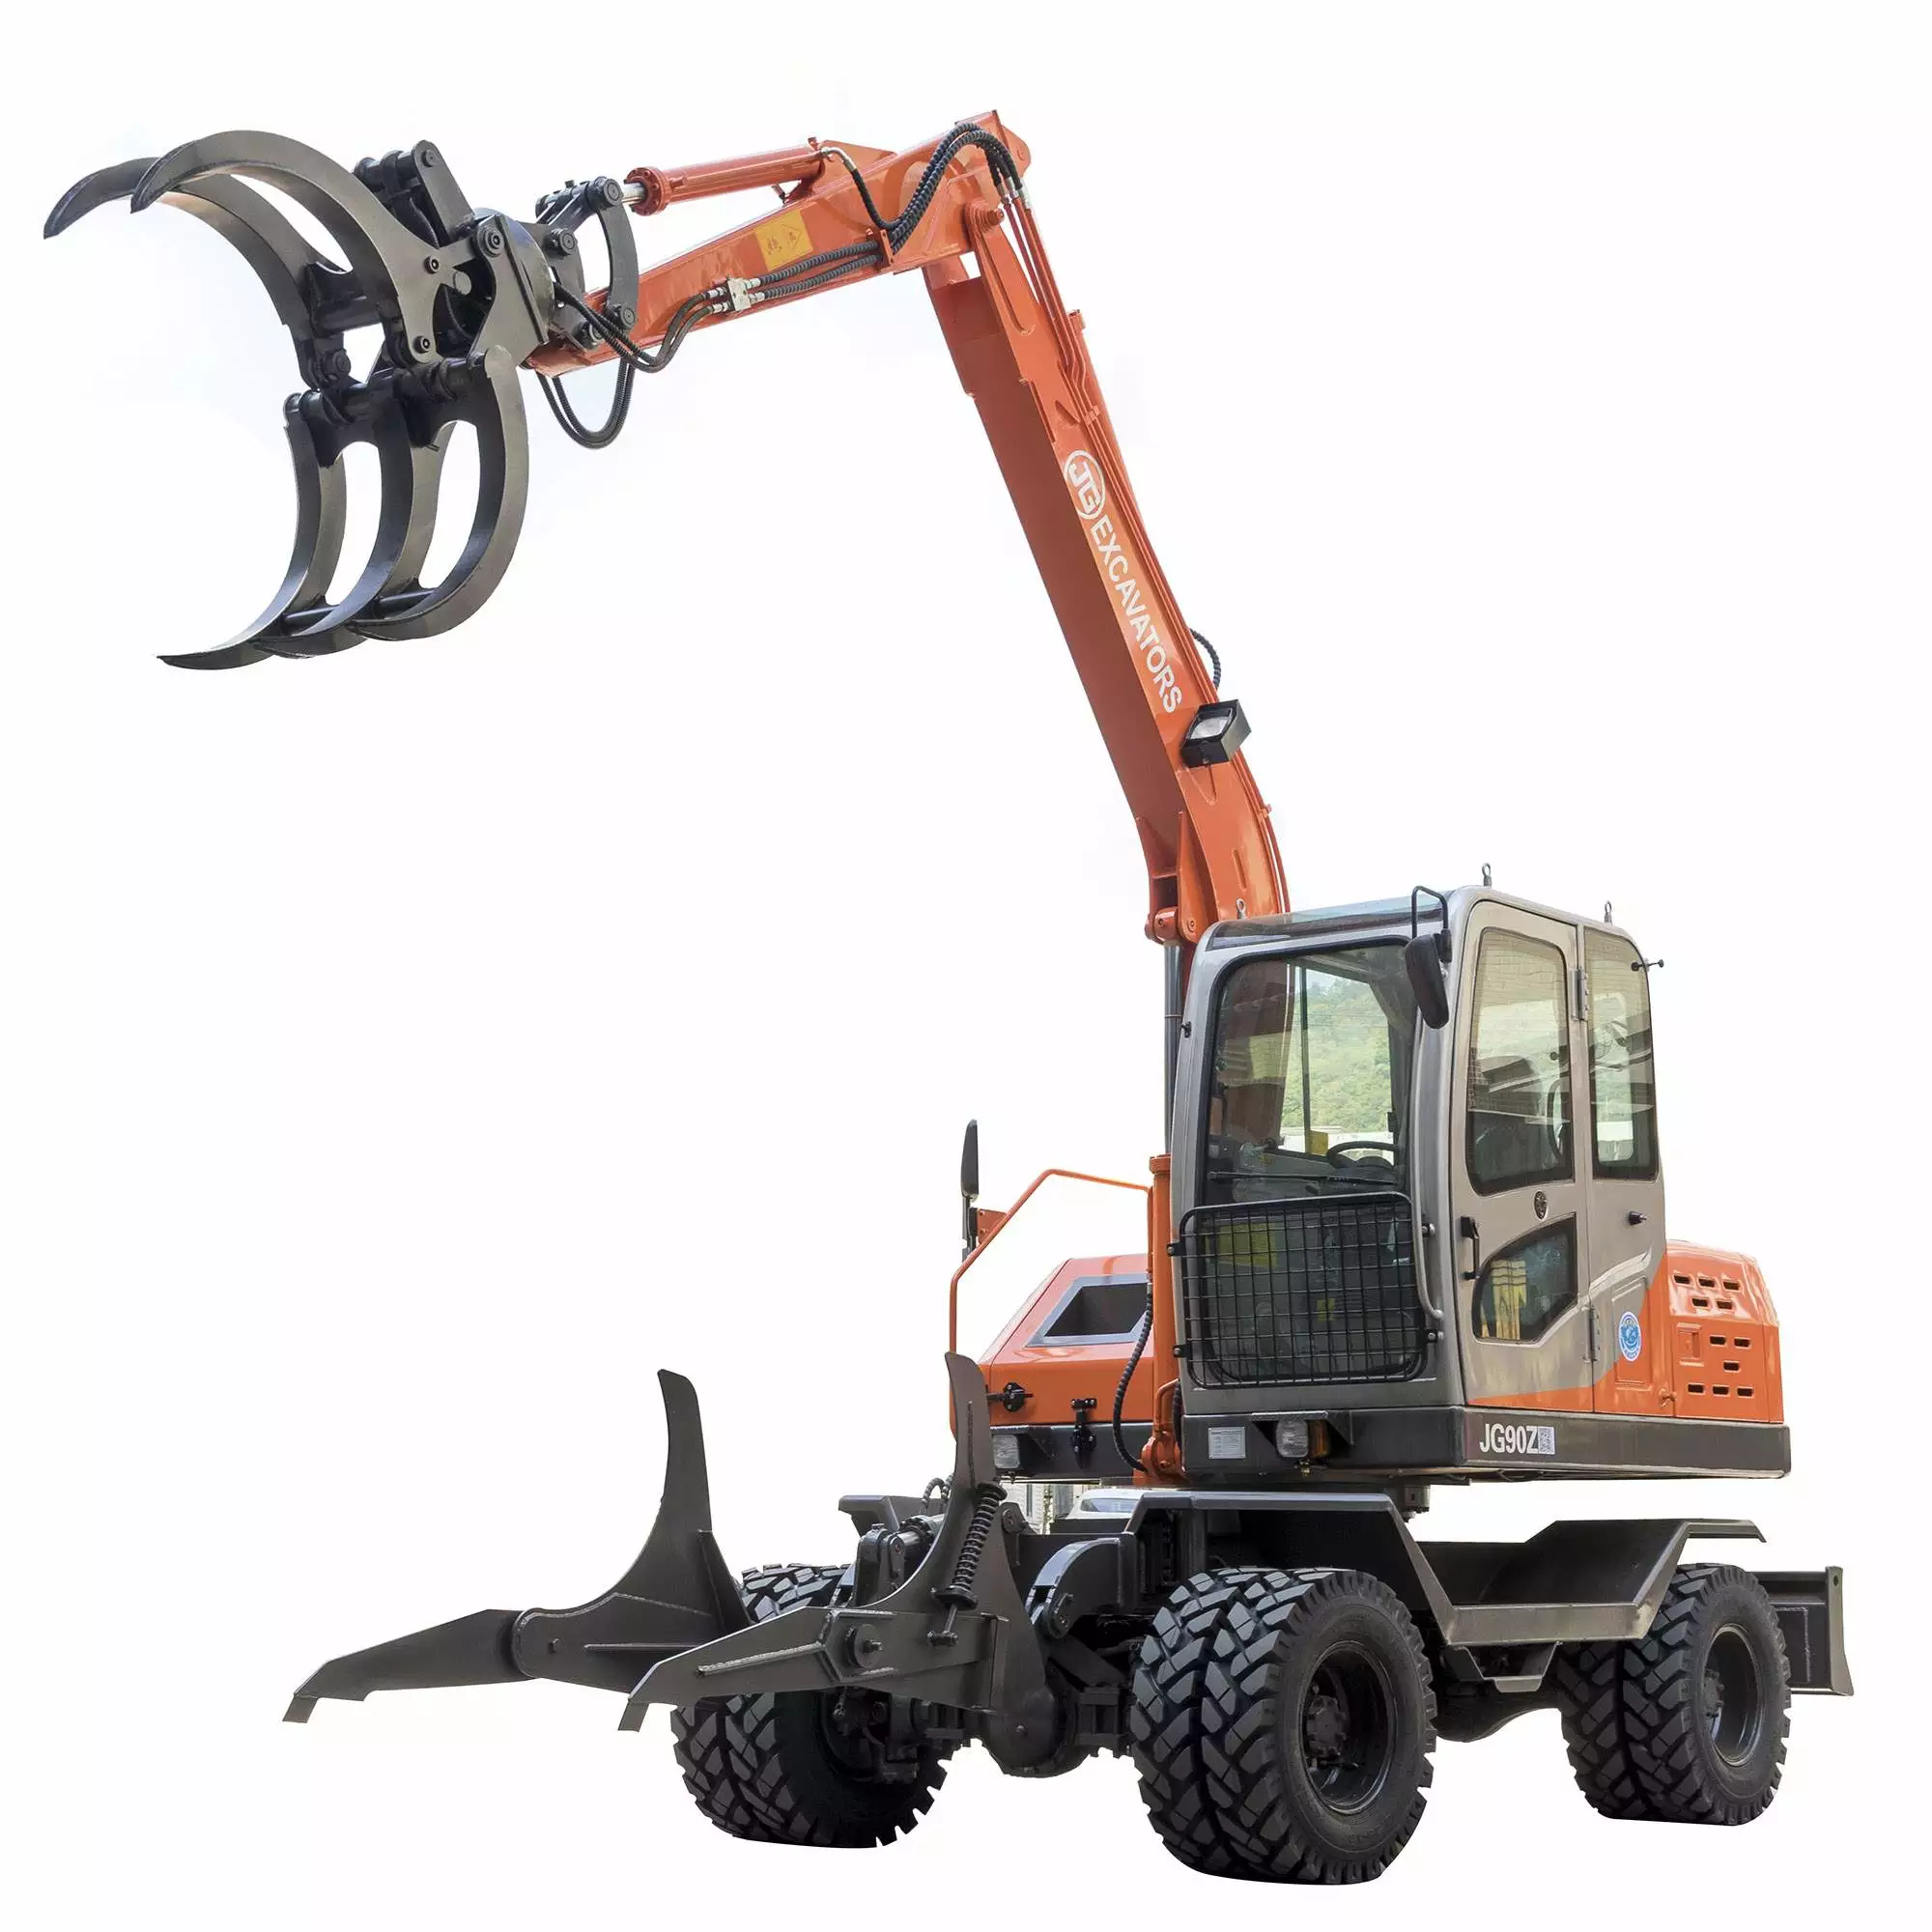 8.36 Ton Wheeled Loader with Brush Grapple, Rate Power 65 KW